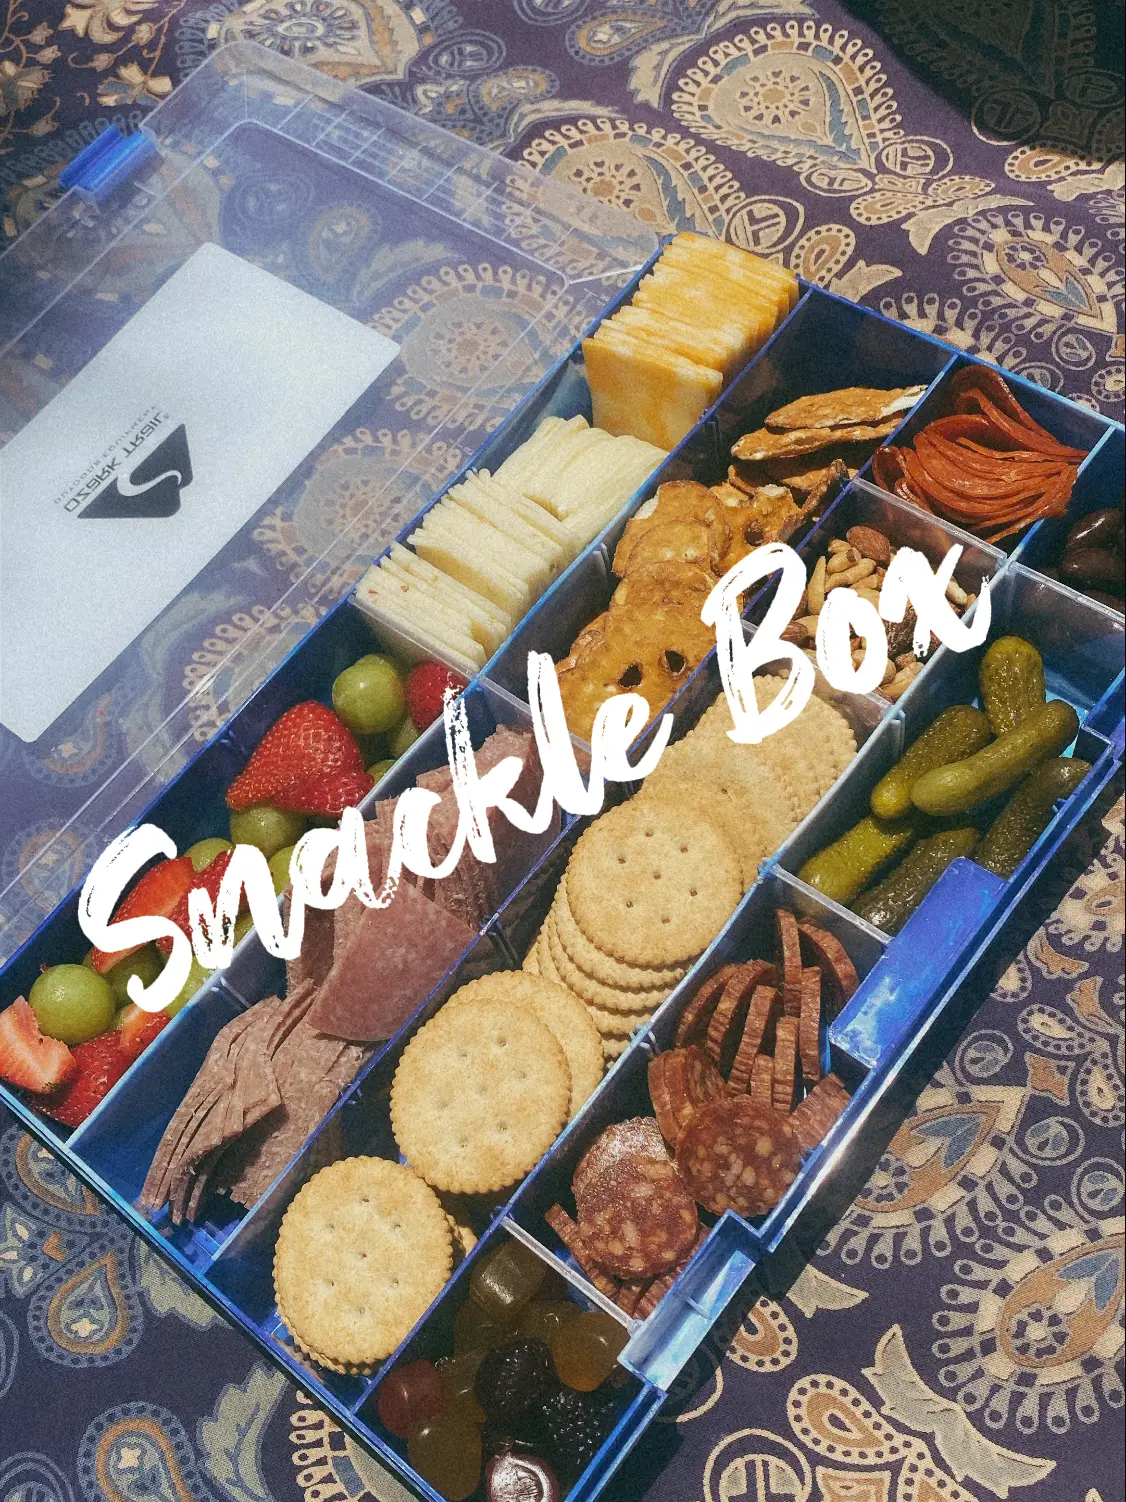 The 'Snackle Box' Is TikTok's Latest Food Hack